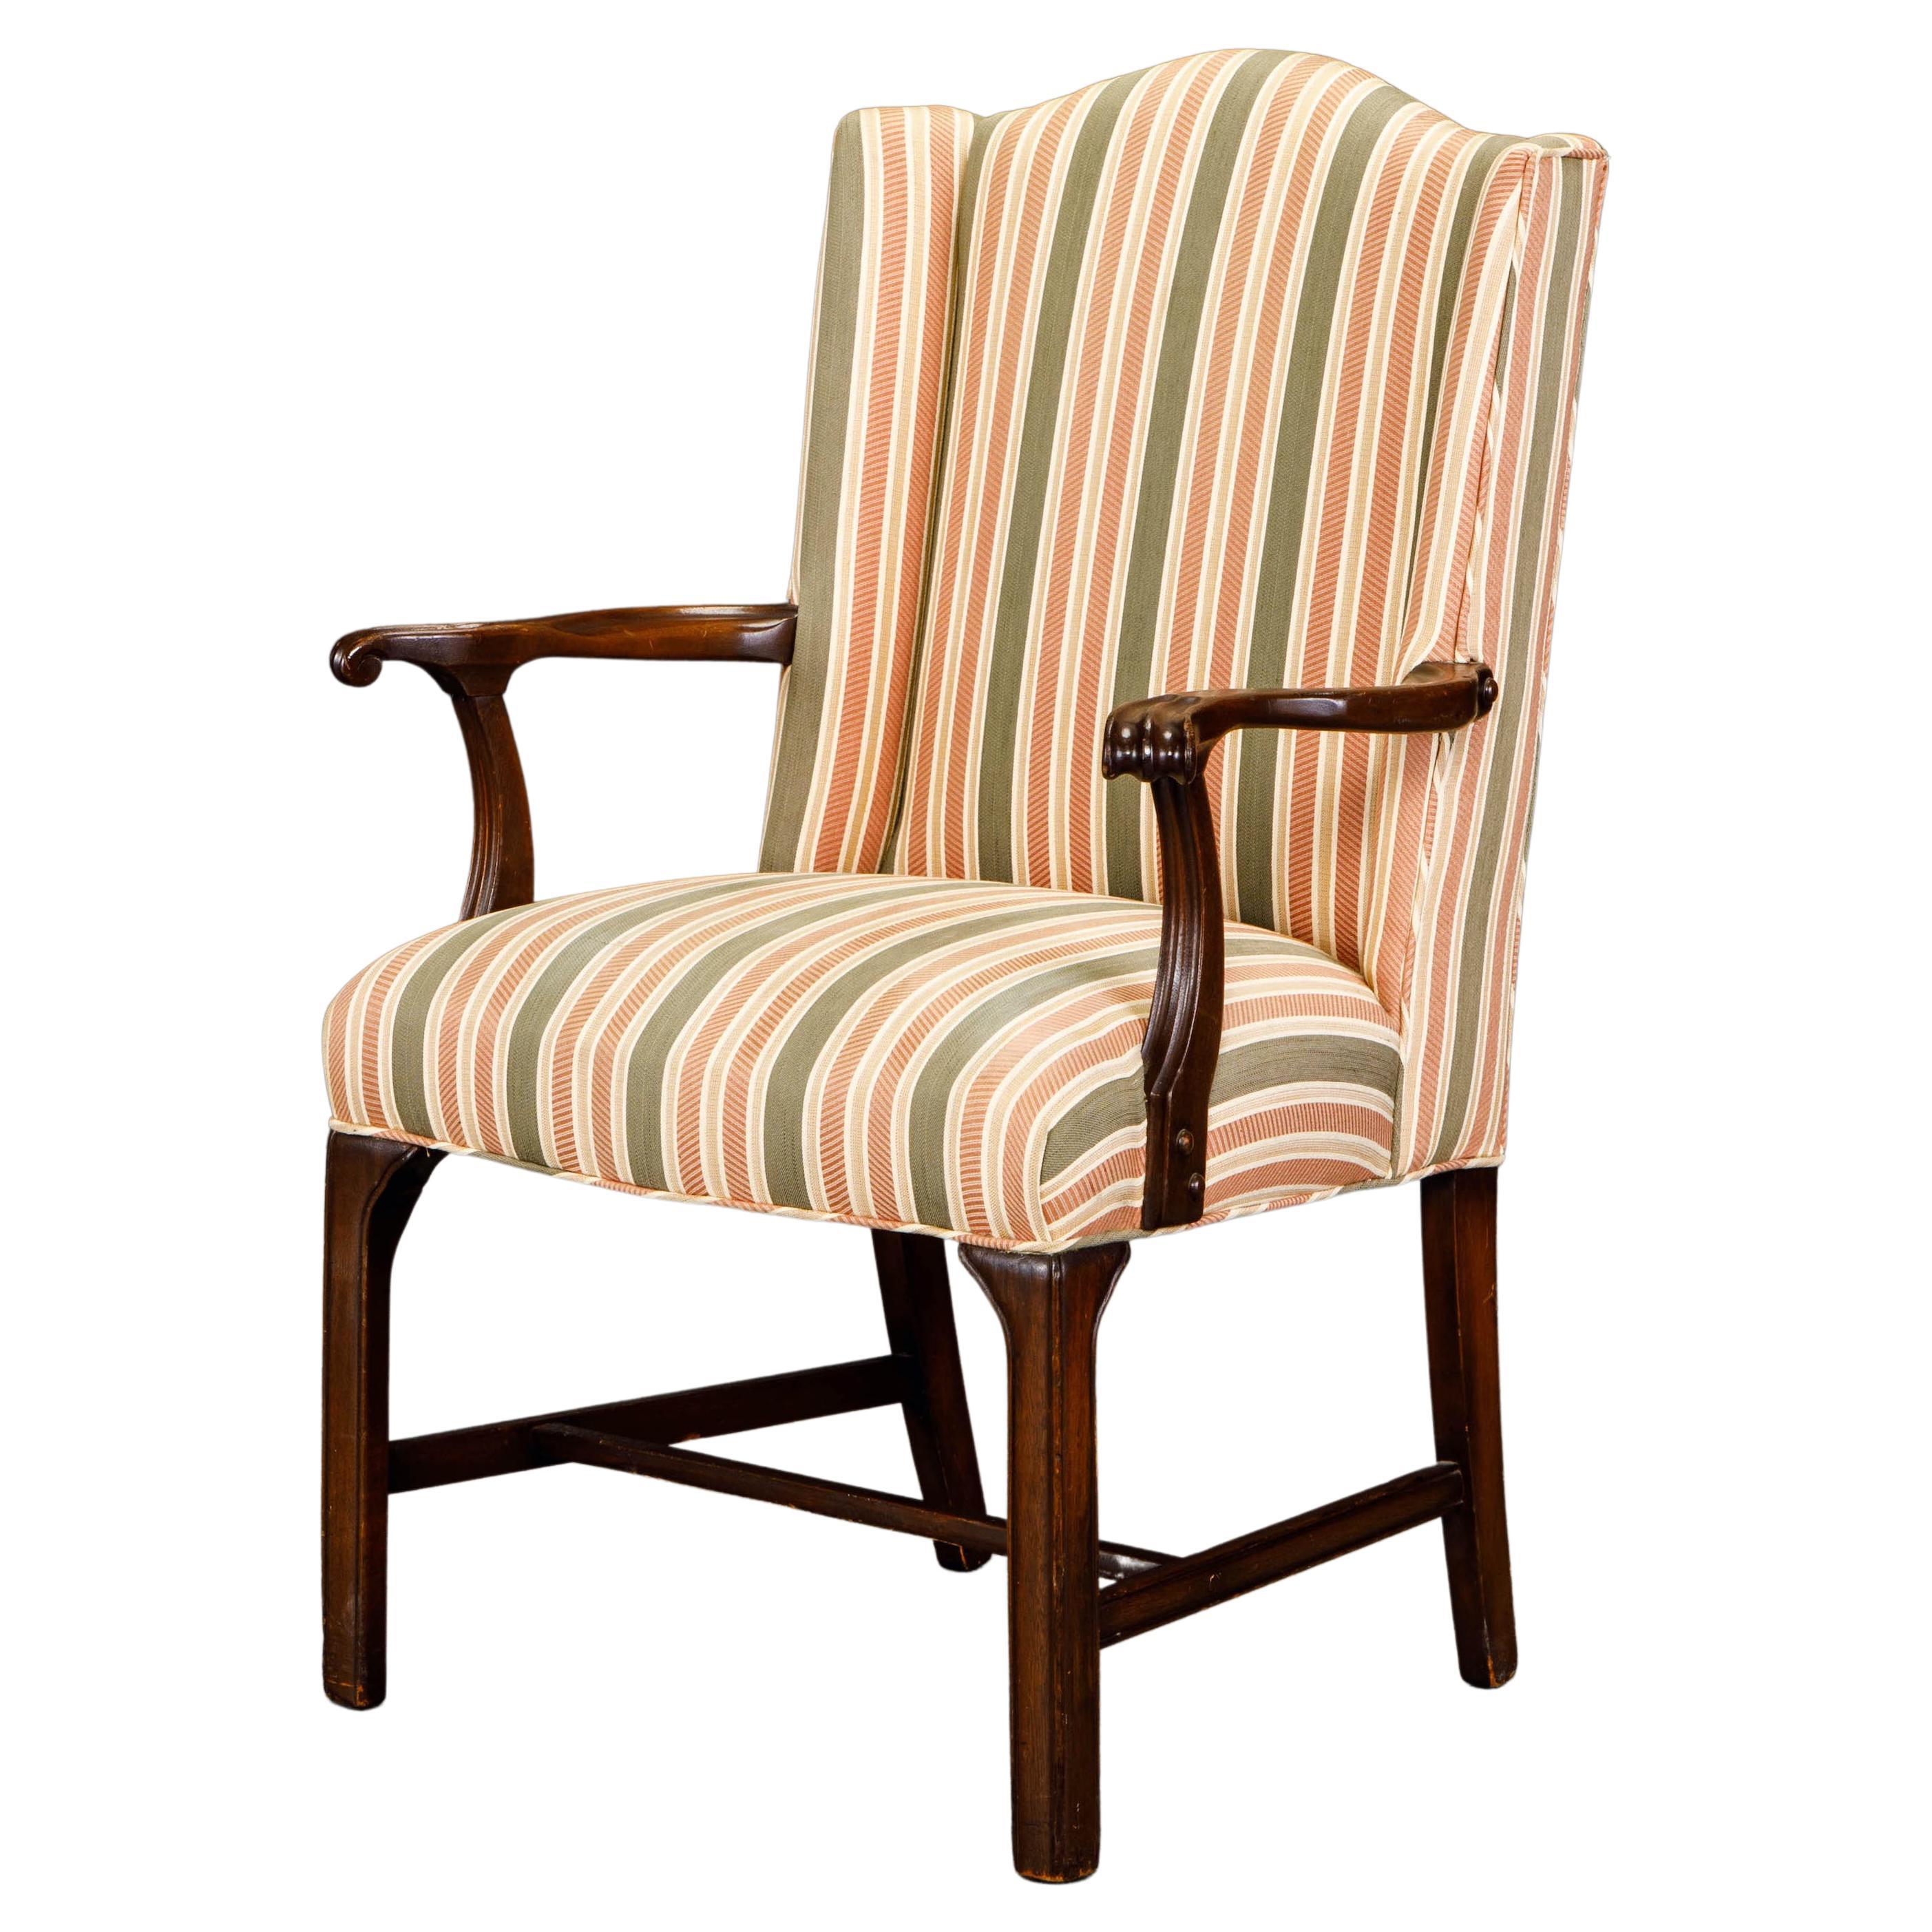 Gainsborough Wingback Armchair Upholstered in Striped Fabric